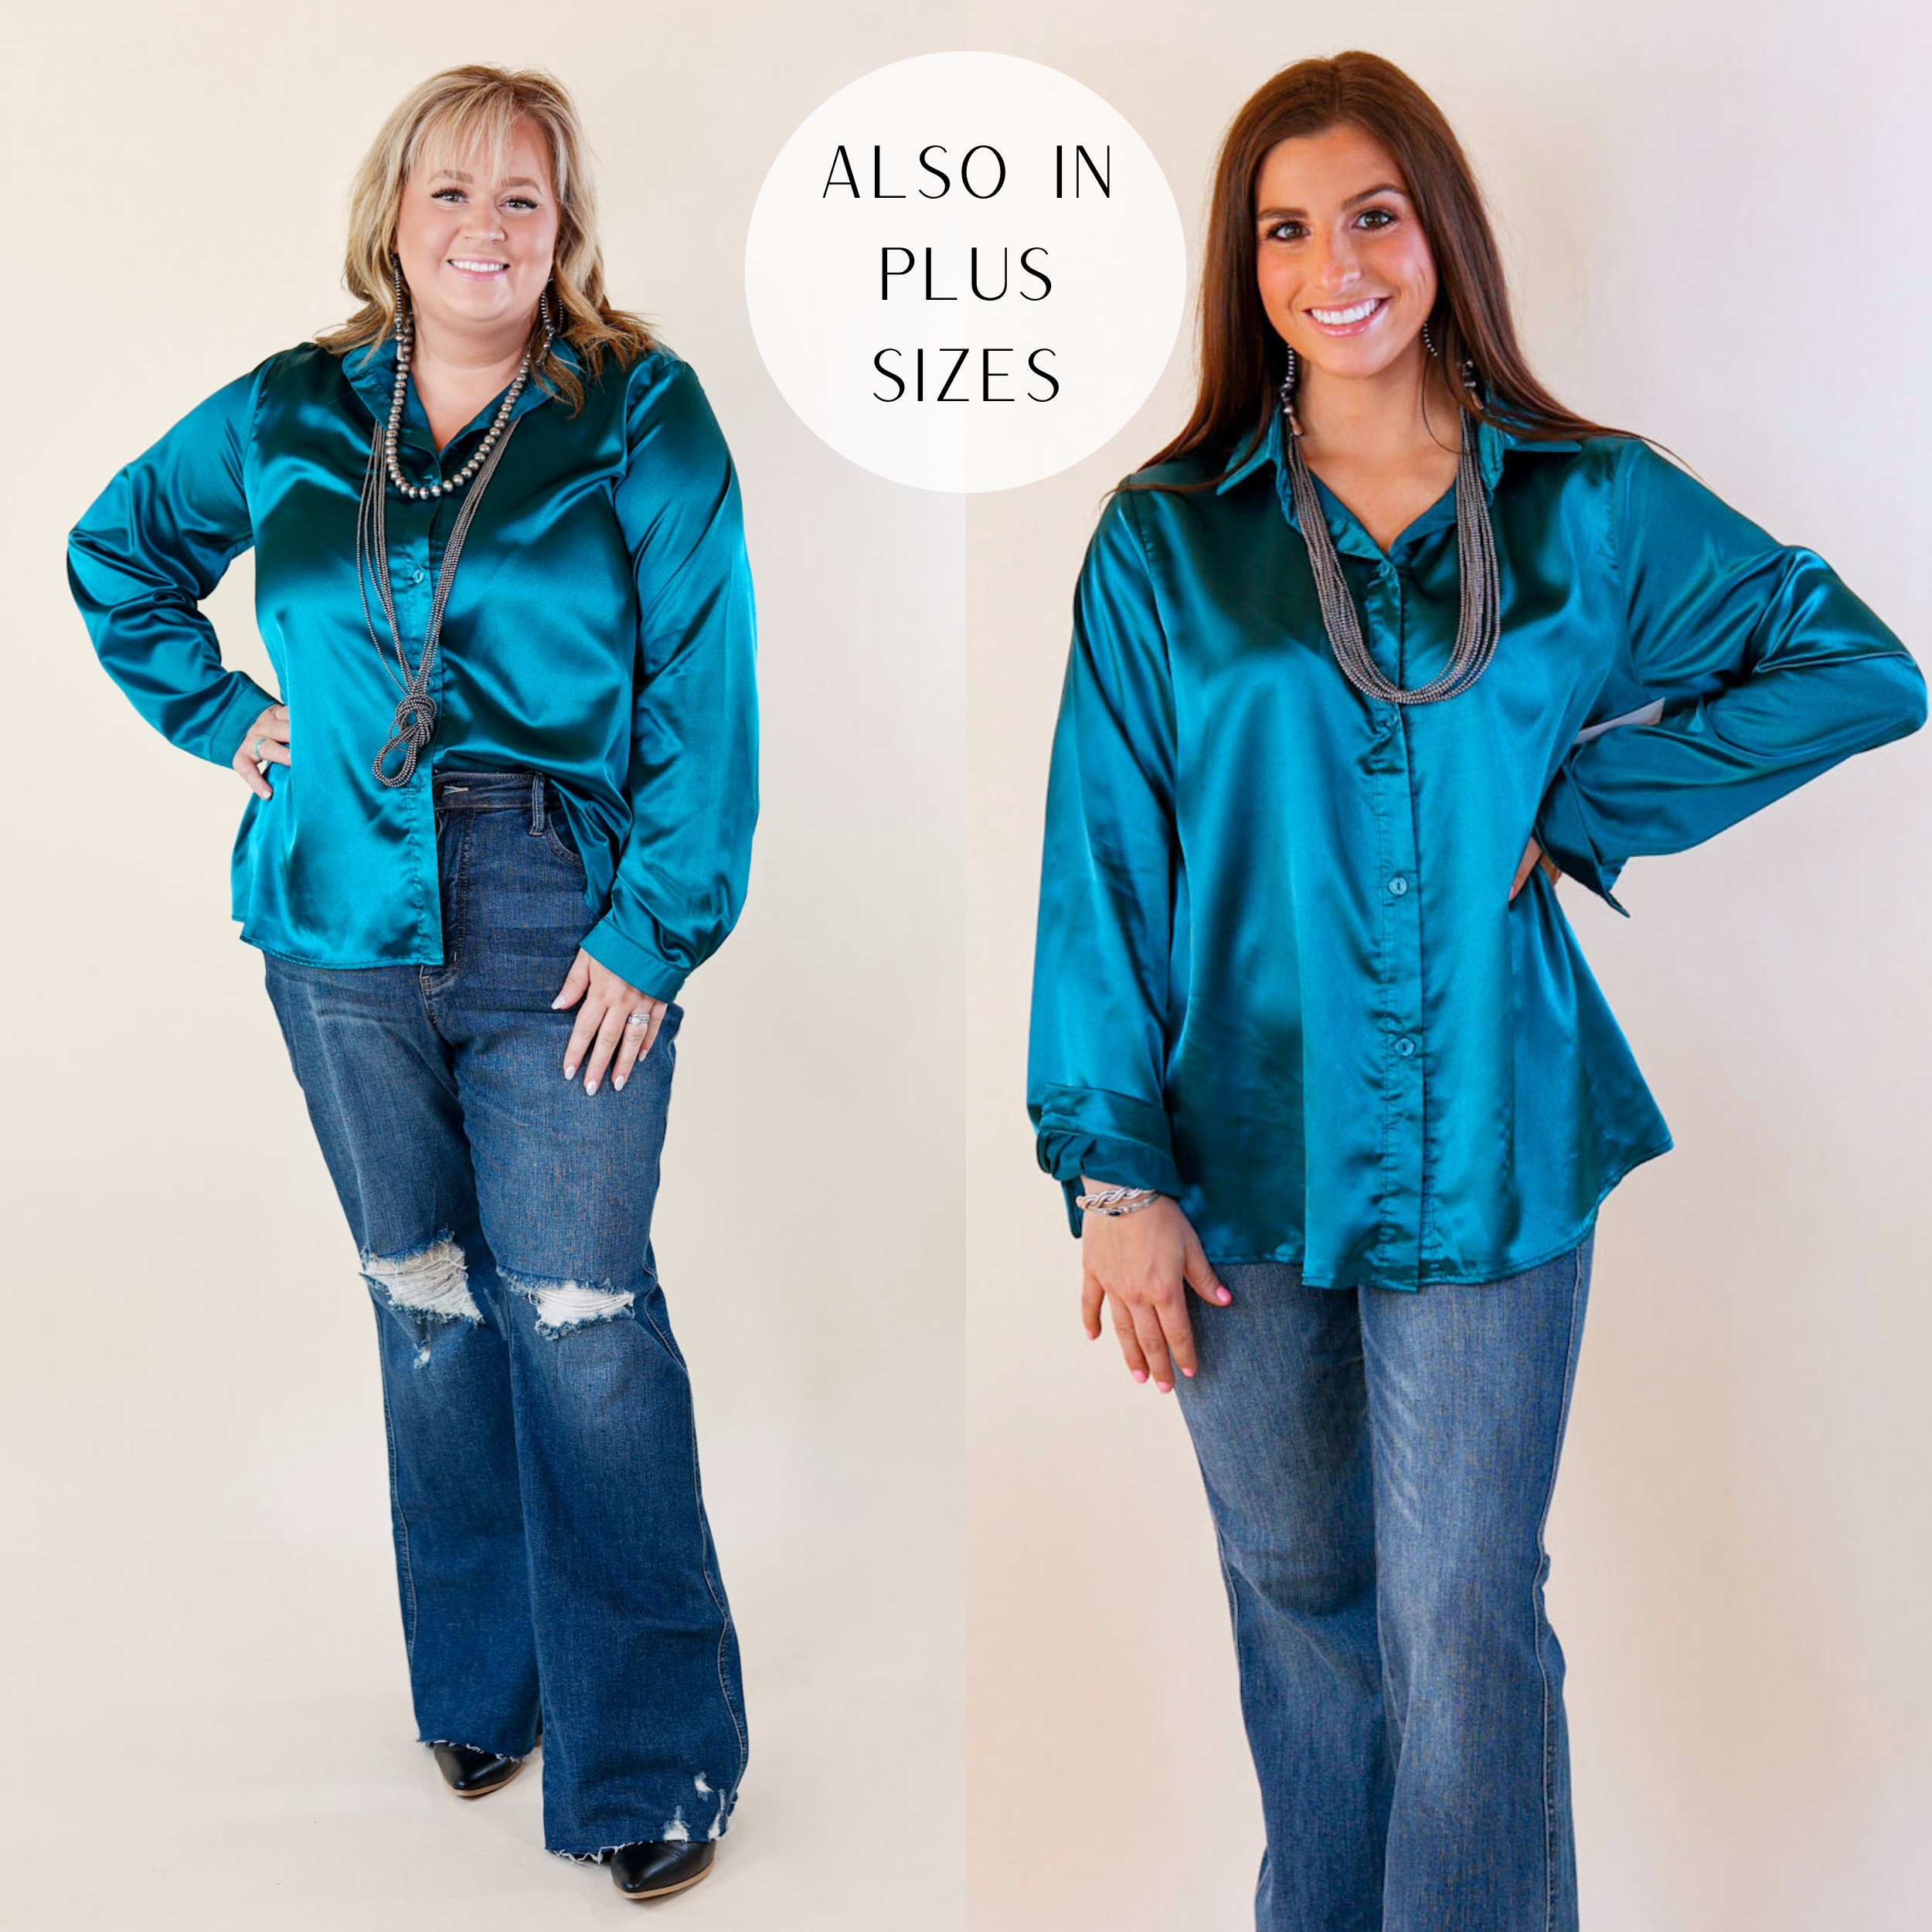 Models are wearing a teal blue satin button up. Plus size model has it paired with distressed jeans and black boots. Small model has it paired with dark washed jeans and silver jewelry.